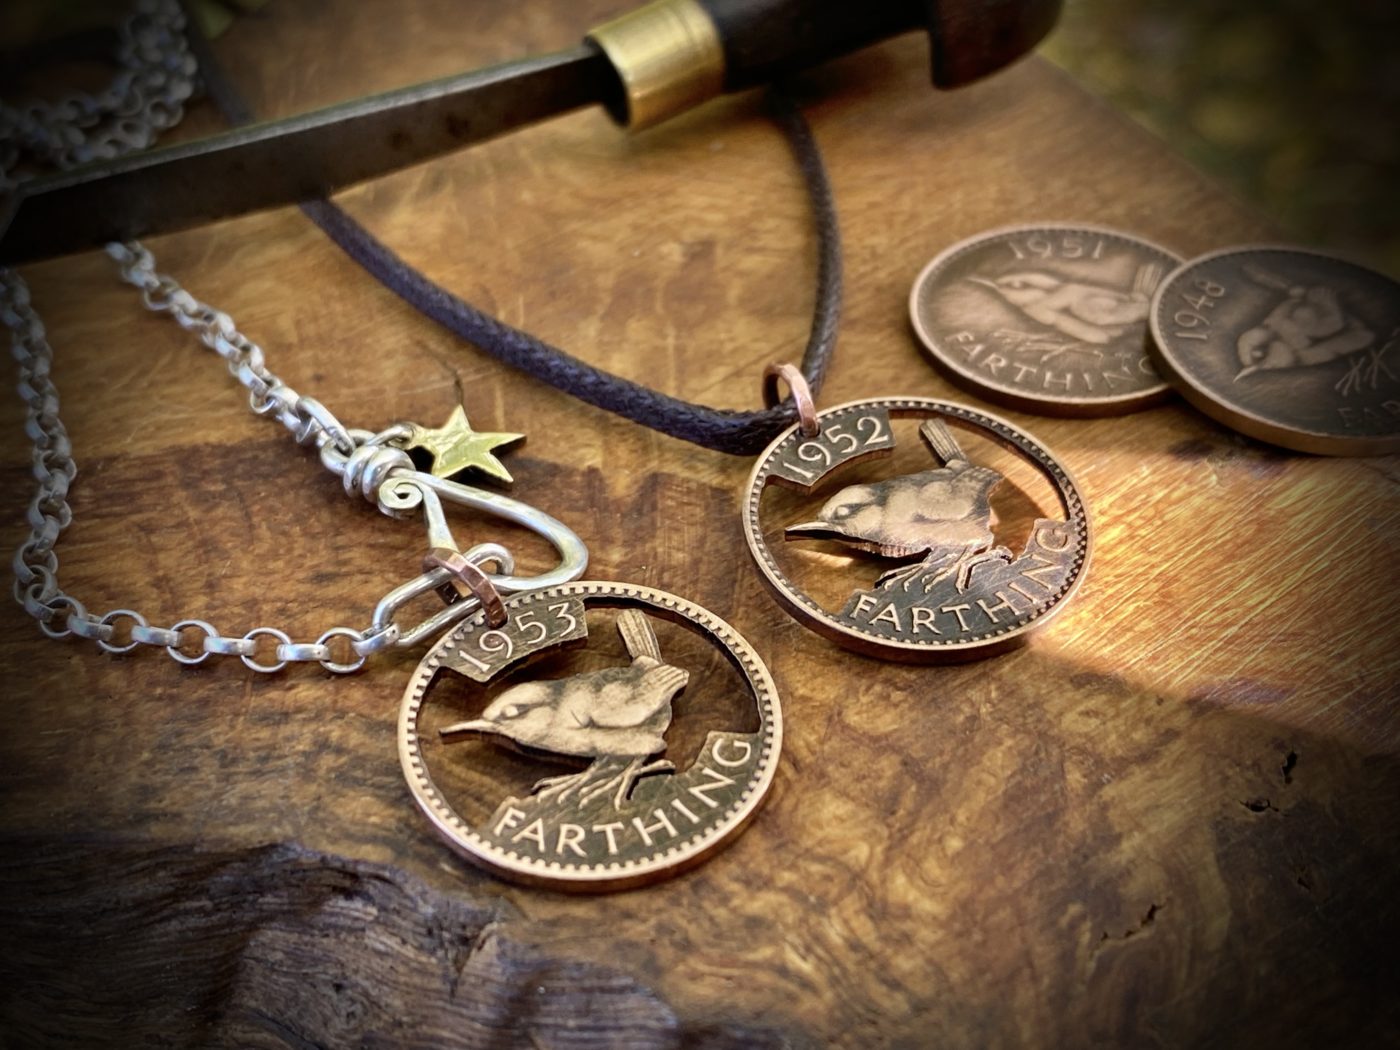 Jenny wren coin jewellery Hand cut Jenny Wren Farthing coin pendant necklace made in the Hg workshop